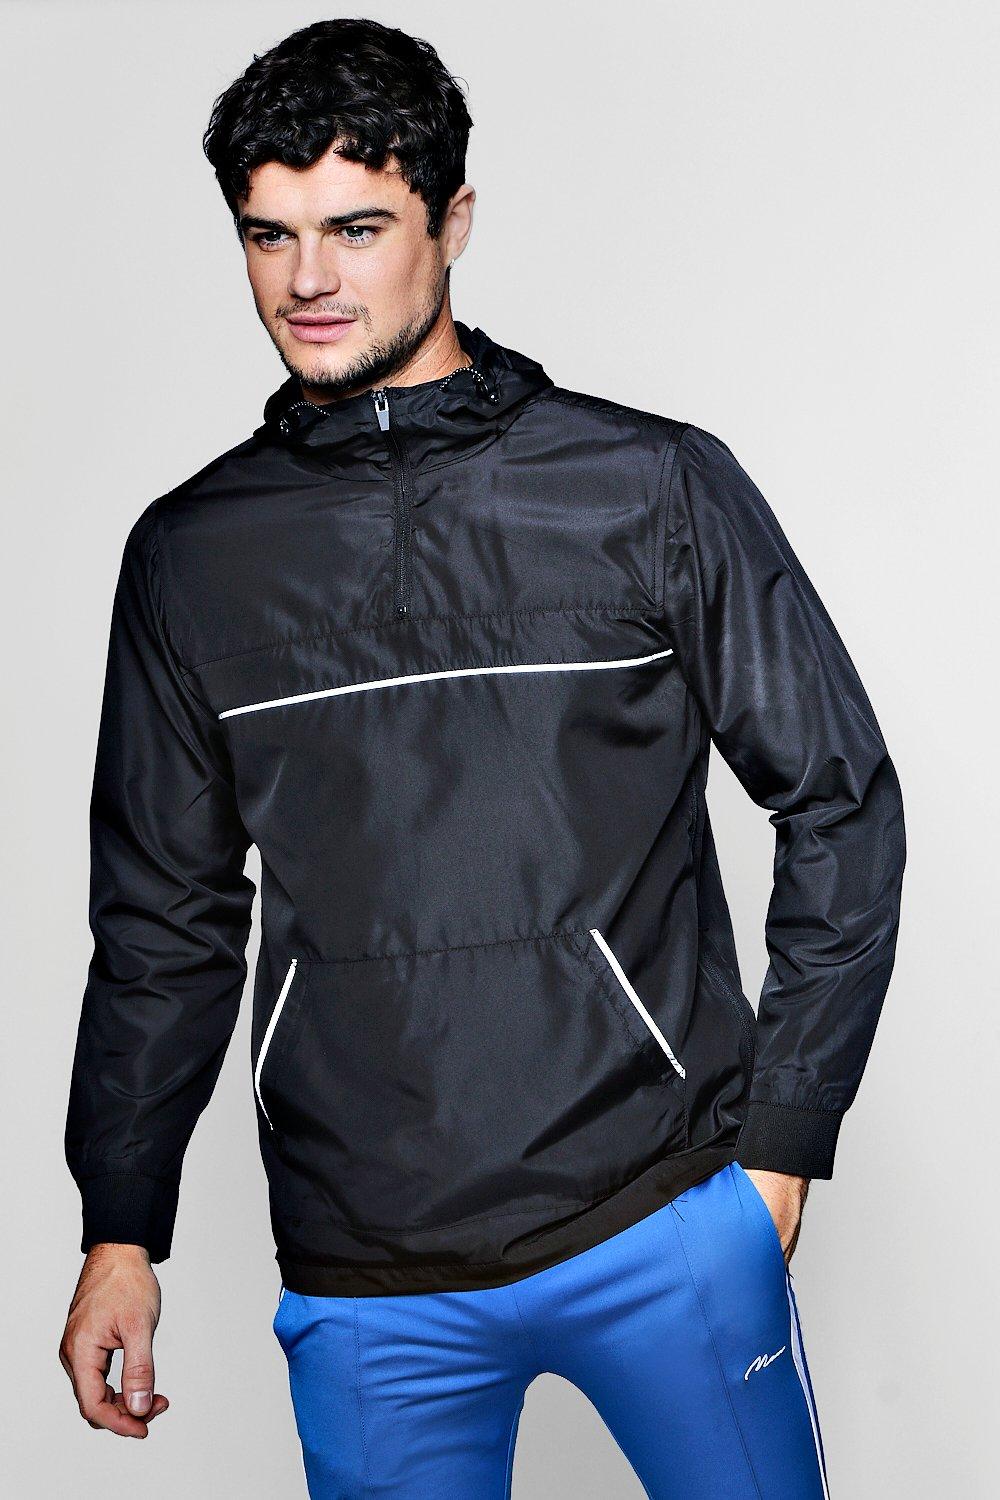 The 12 Best Cagoule Jackets | 12 Best Waterproof Jackets | Fupping